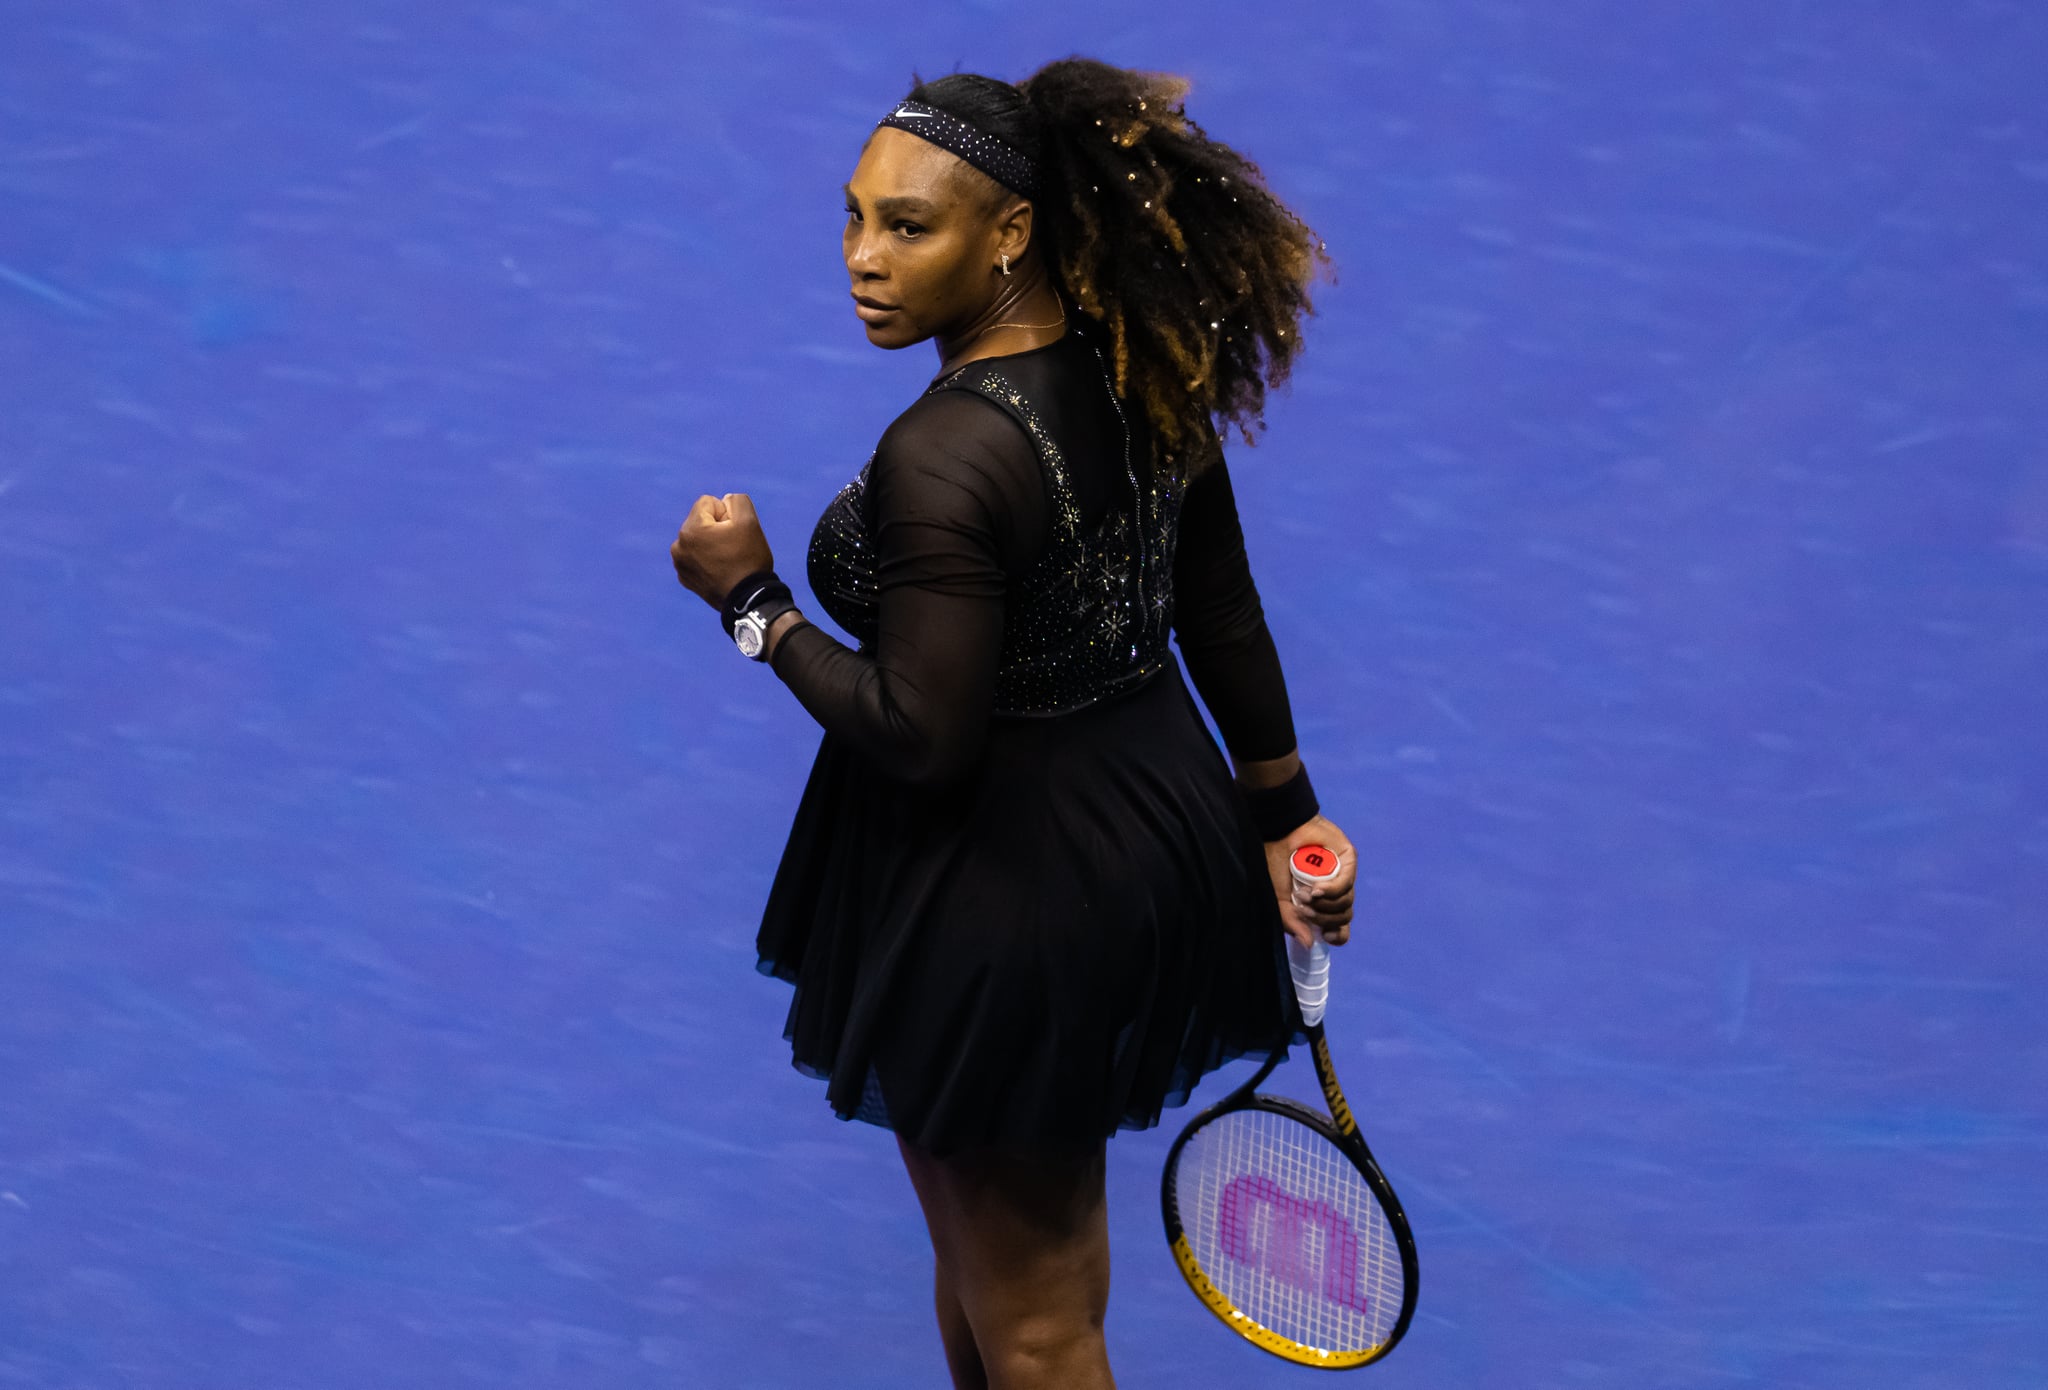 NEW YORK, NEW YORK - AUGUST 31: Serena Williams of the United States celebrates winning a point against Anett Kontaveit of Estonia during her second round match on Day 3 of the US Open Tennis Championships at USTA Billie Jean King National Tennis Centre on August 31, 2022 in New York City (Photo by Robert Prange/Getty Images)